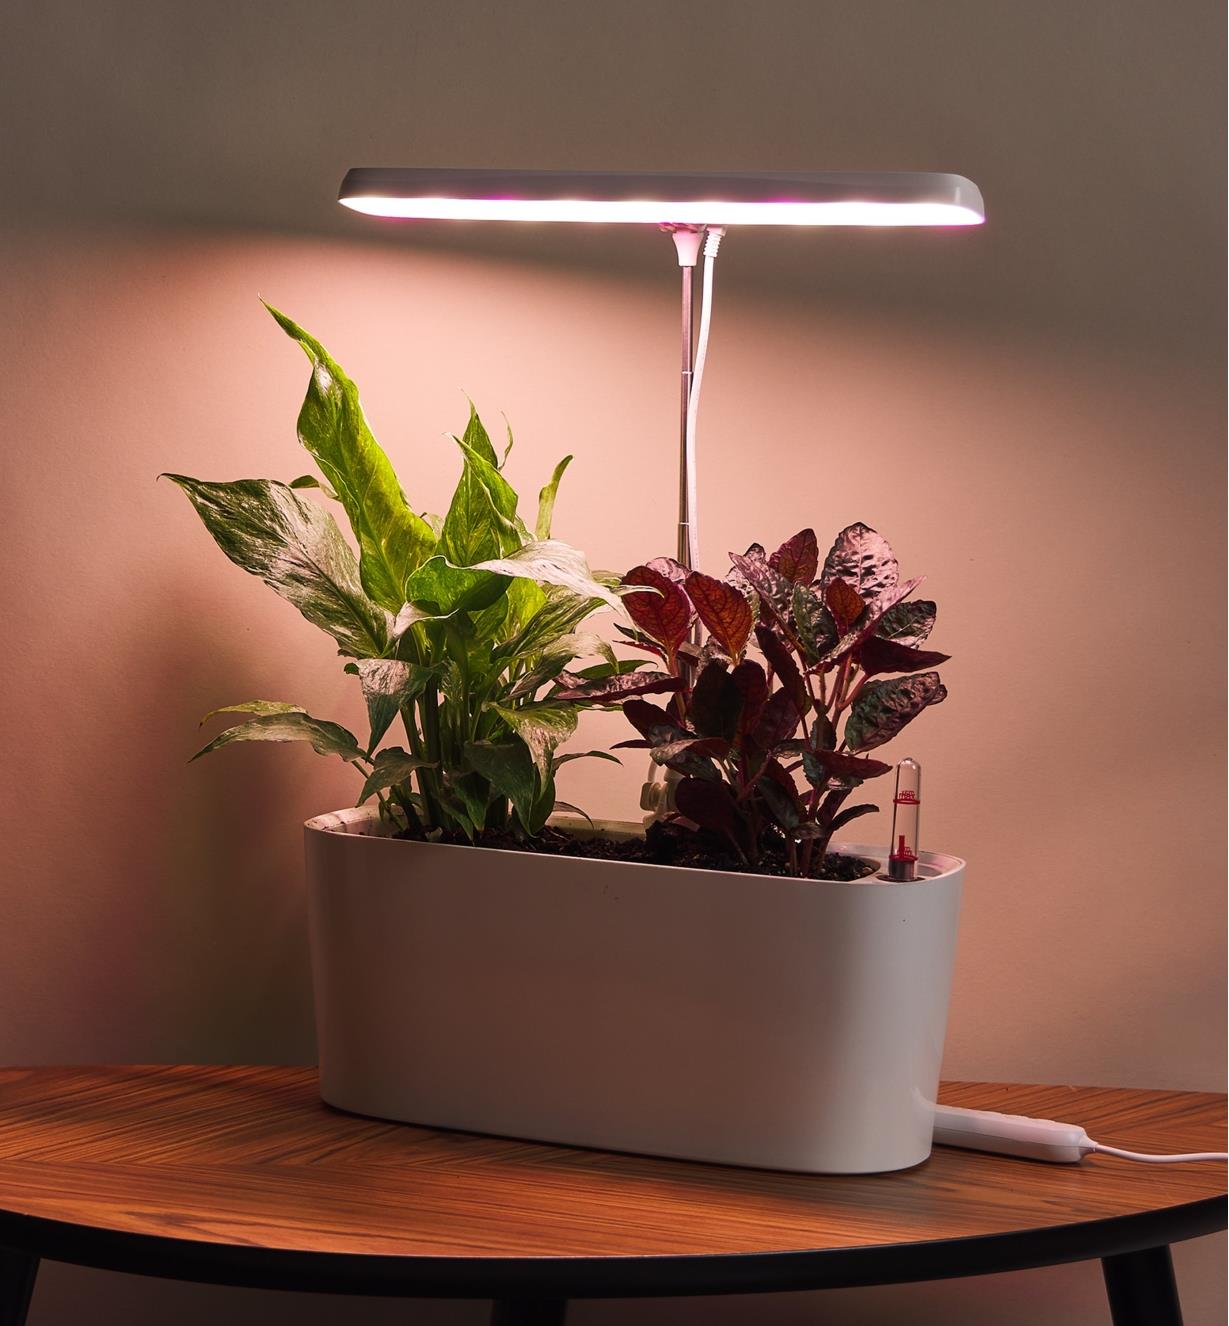 Two houseplants growing in a grow light & self-watering planter set placed on a small table